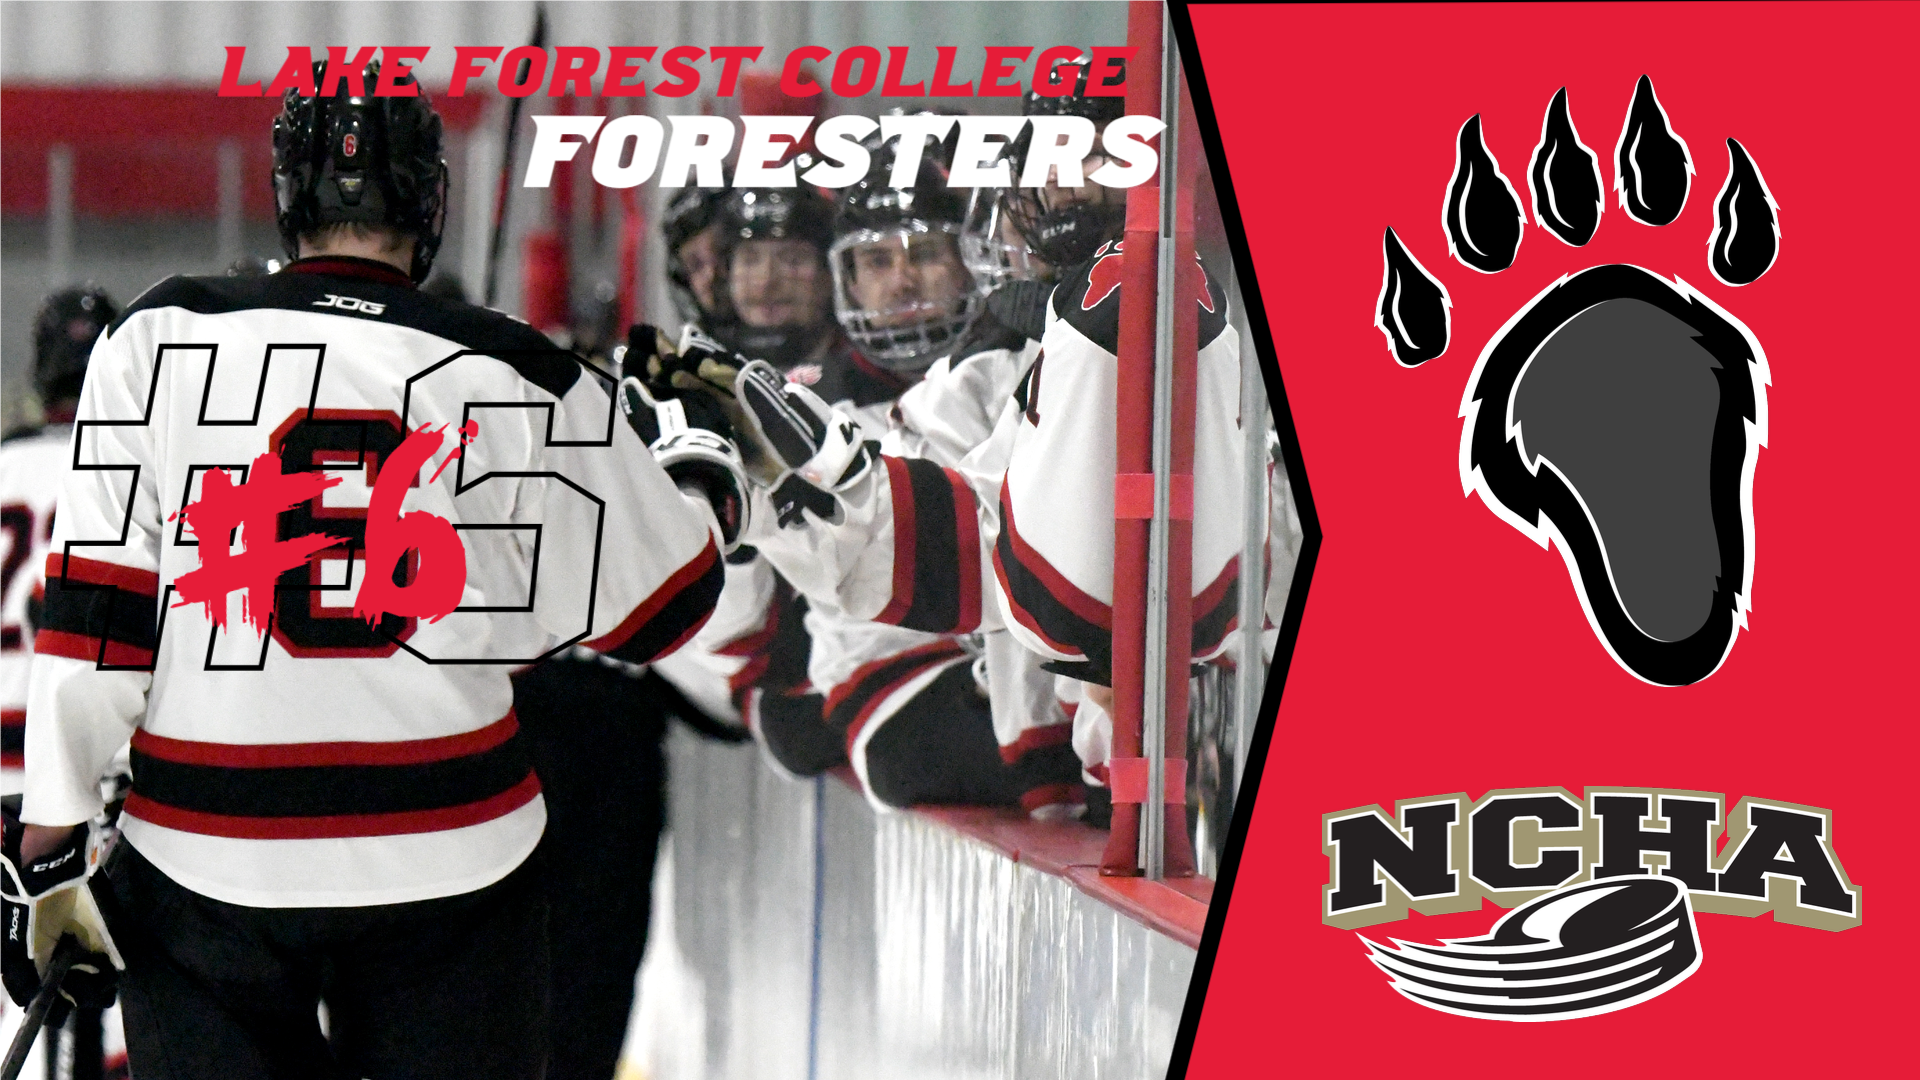 Lake Forest Listed Sixth in NCHA Preseason Coaches Poll